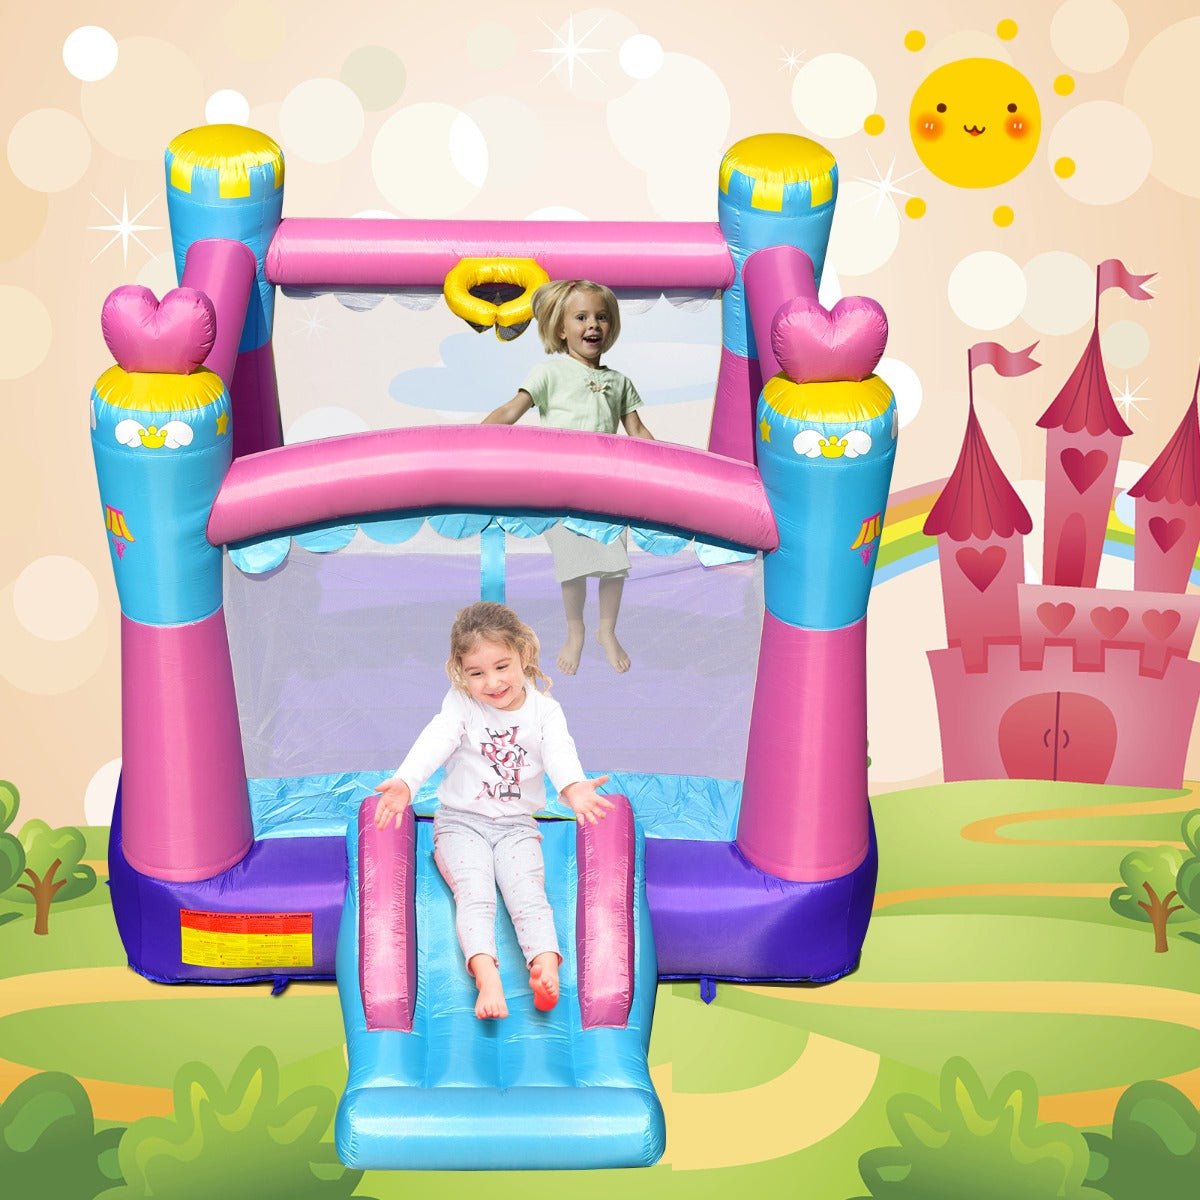 Princess Theme Jumping Castle - Magical Playtime for Kids